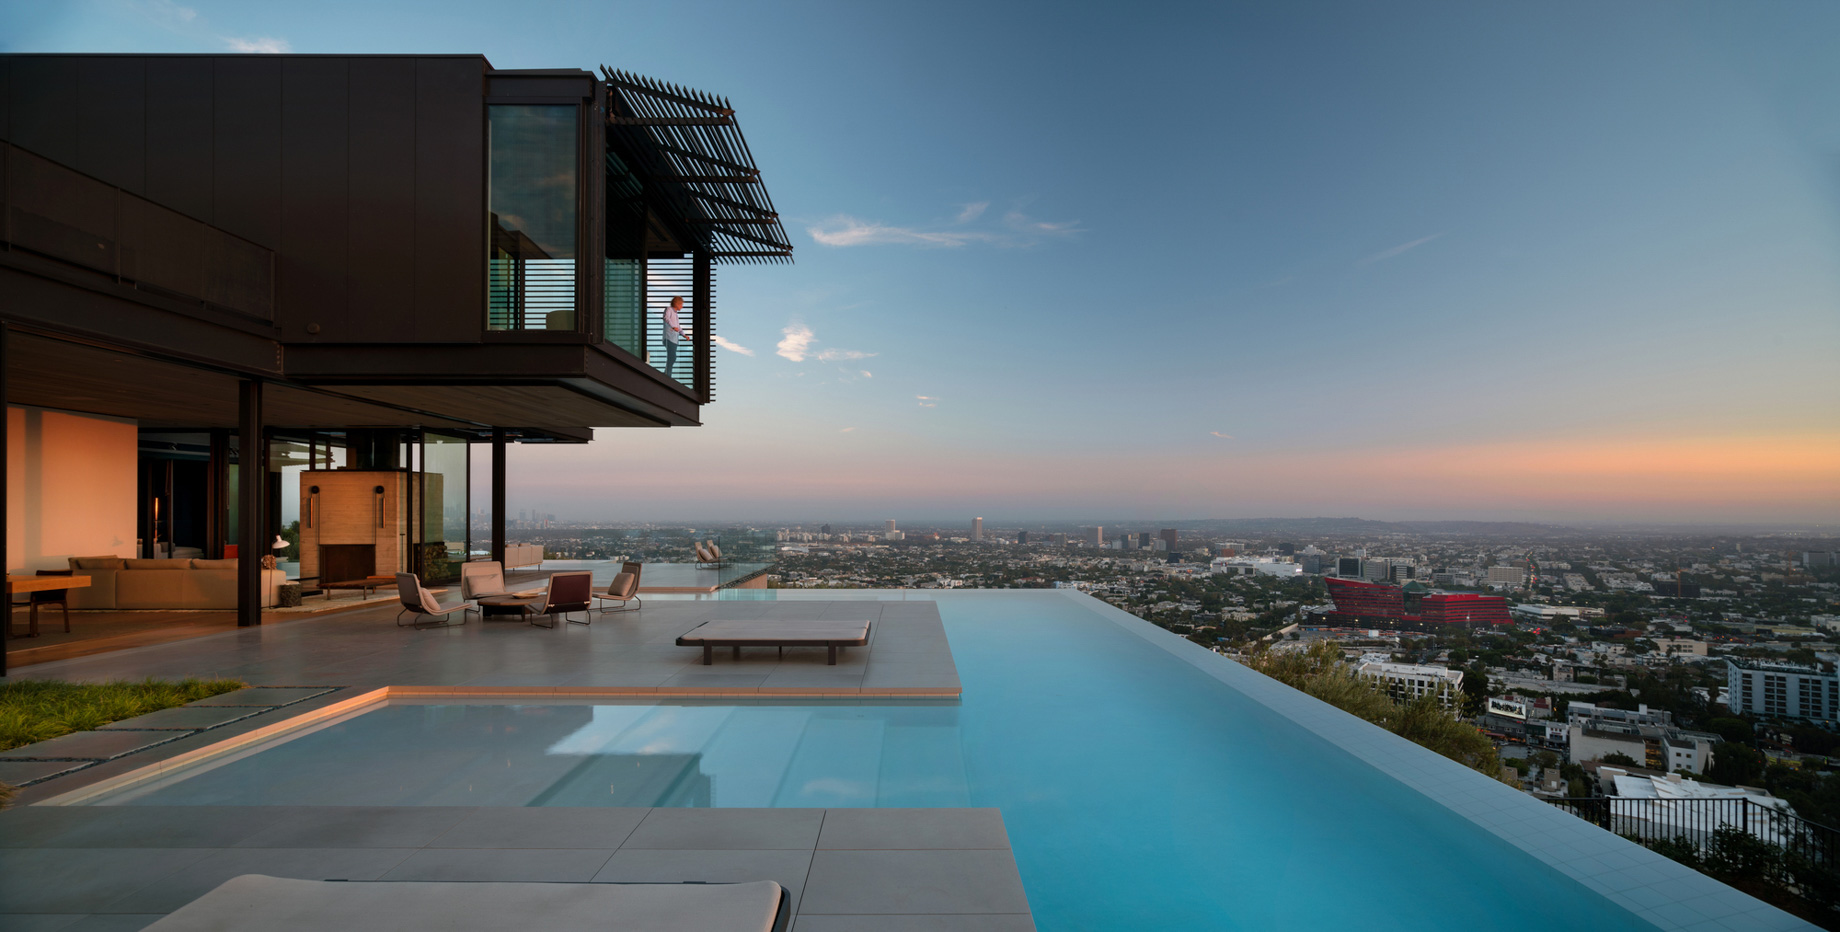 Collywood House – 1301 Collingwood Pl, Los Angeles, CA, USA – West Hollywood Modern Contemporary Home